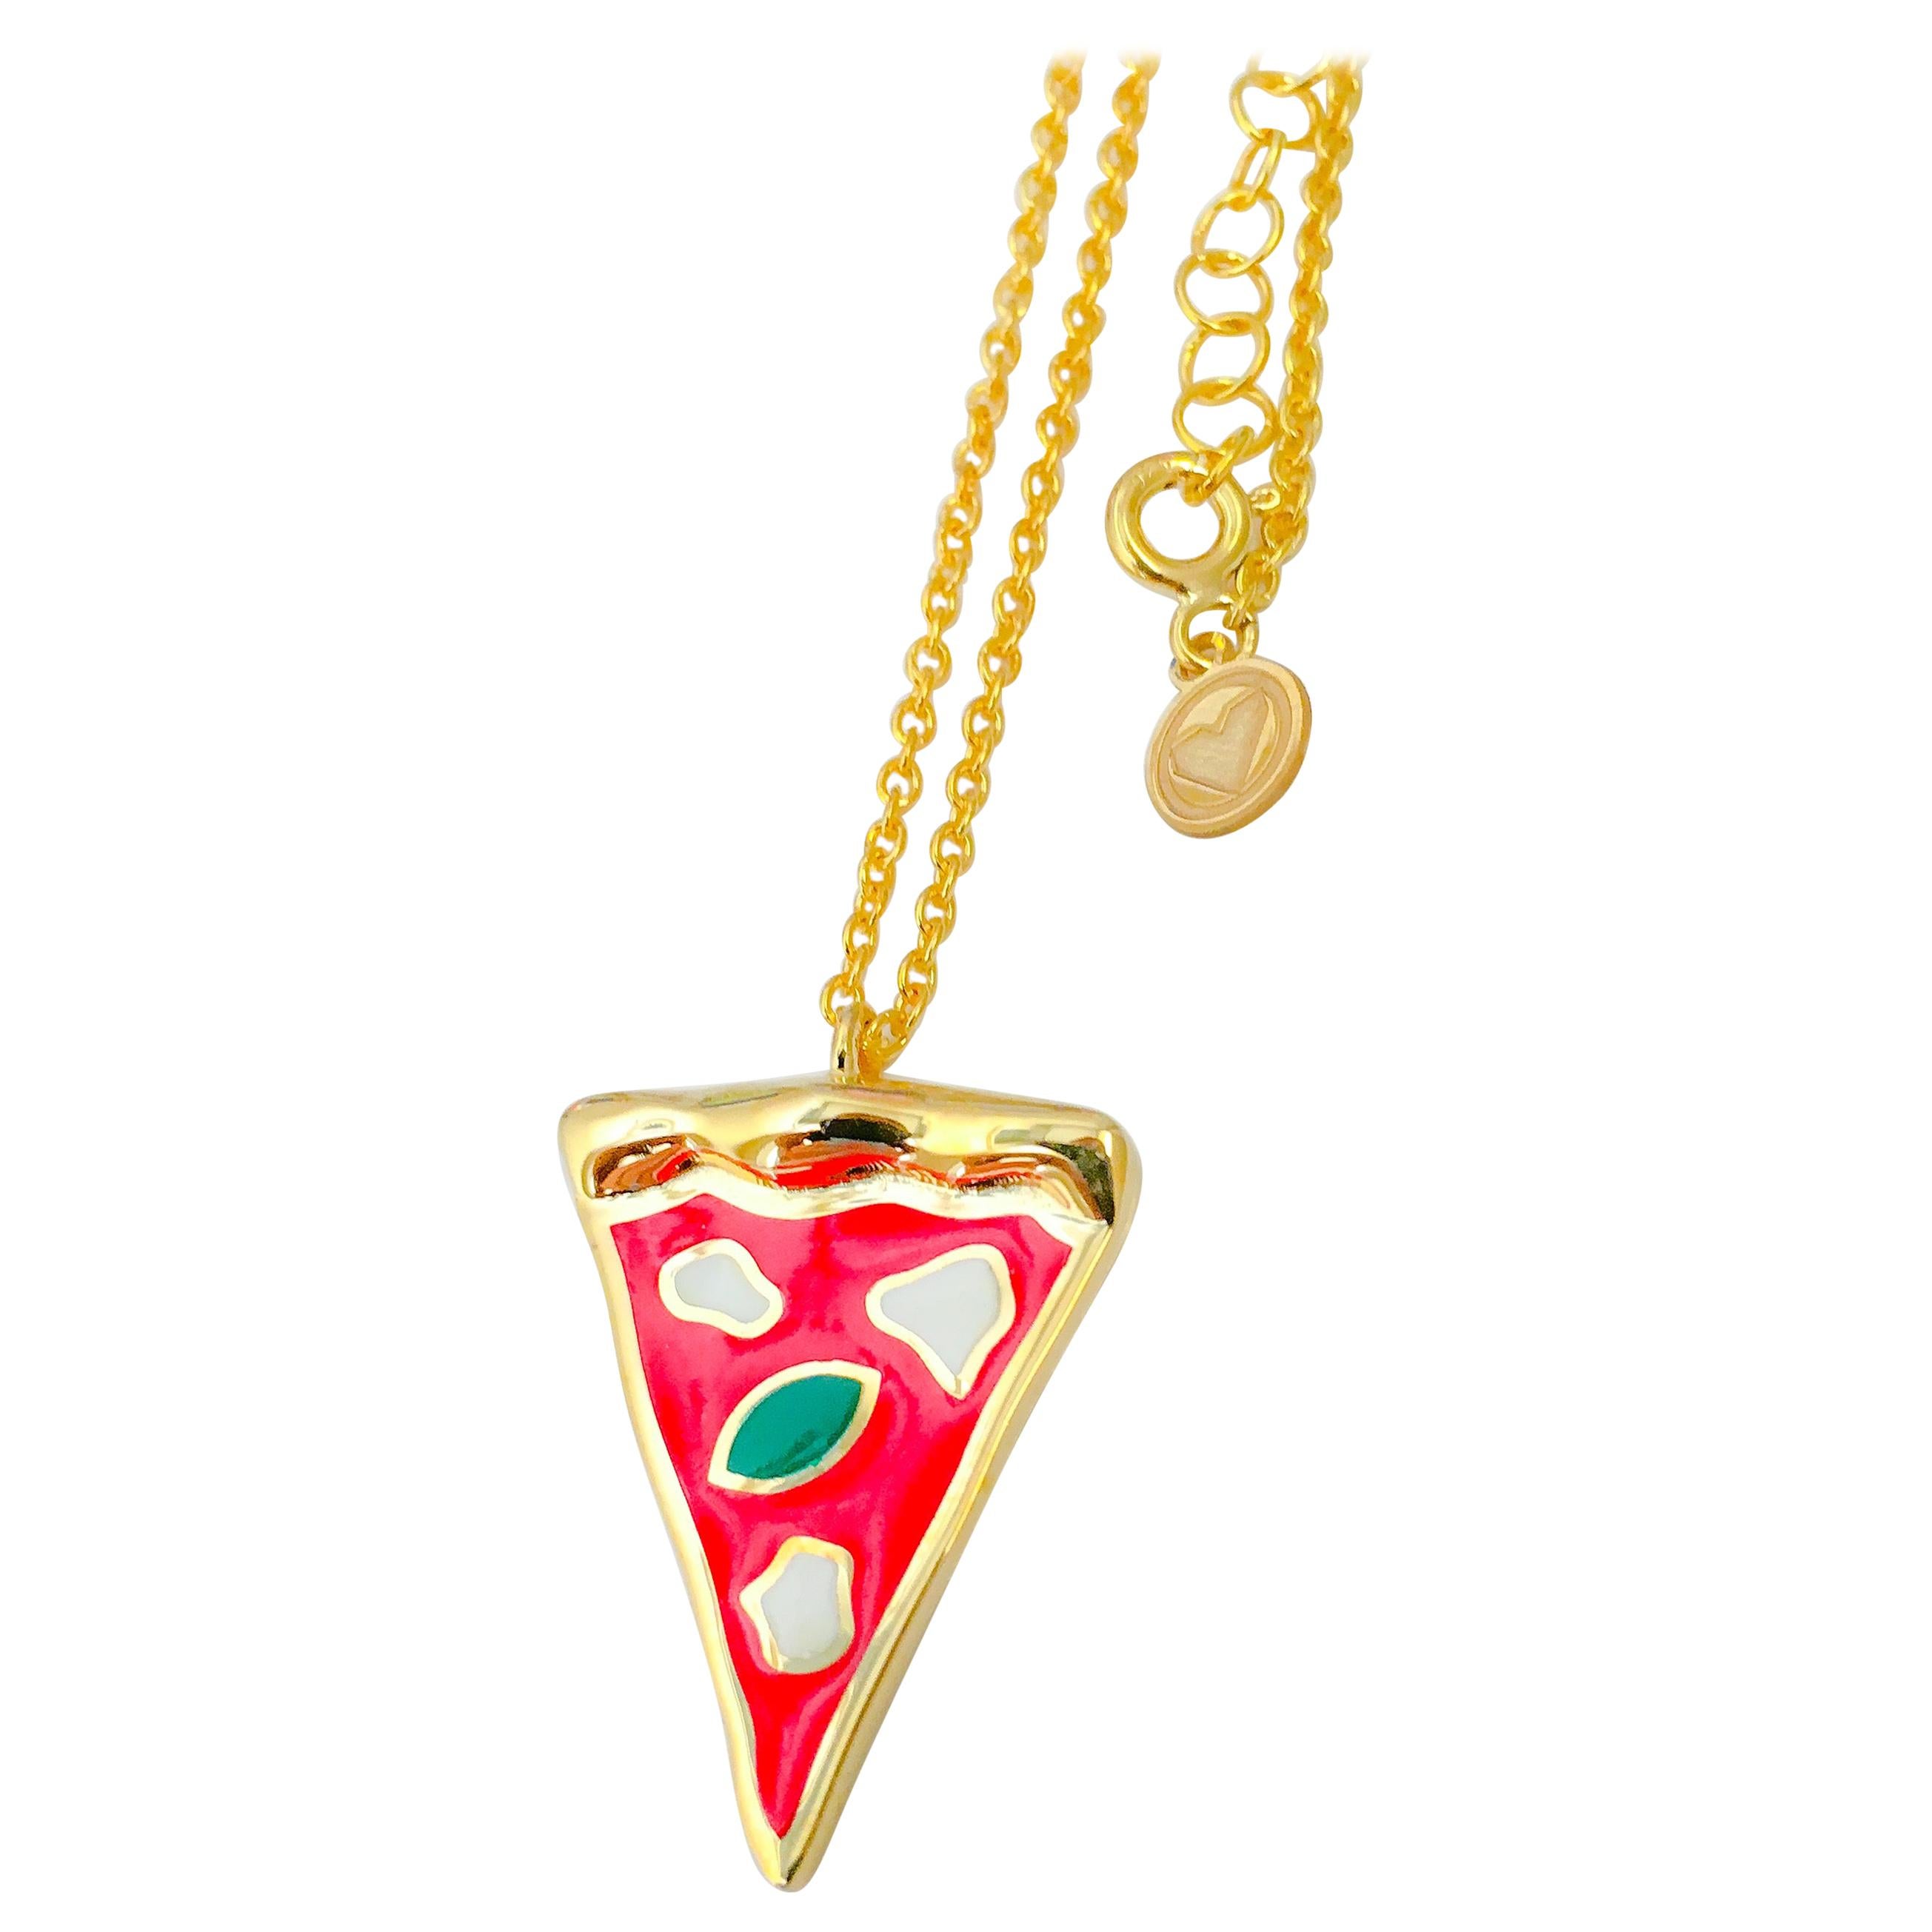 Silver gold bathed Pizza handmade necklace